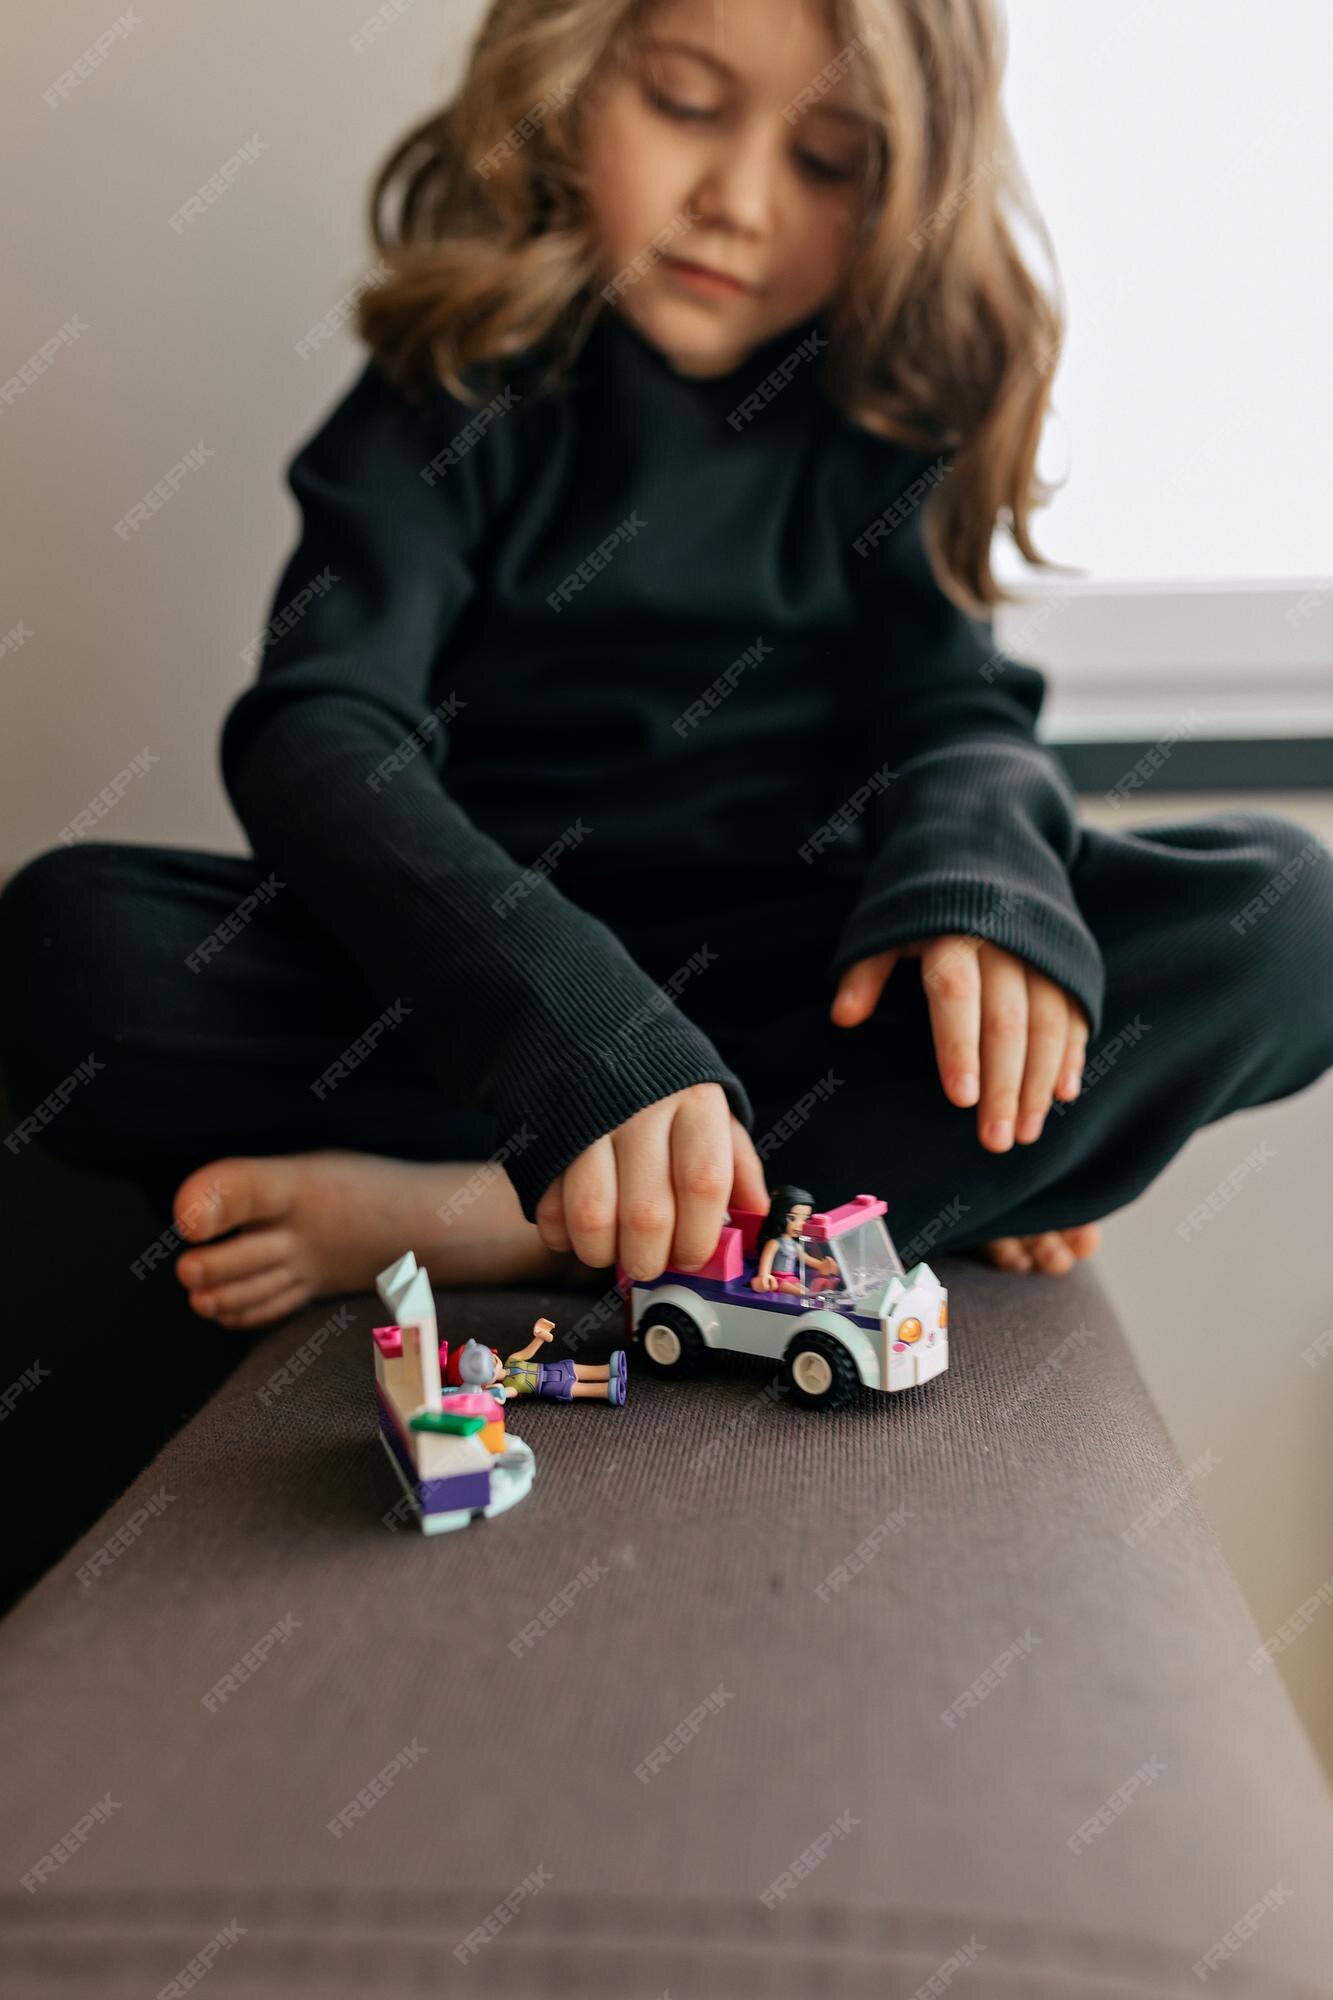 Free Photo | Lovely adorable pretty girl with wavy hairstyle is playing  with toys at home adorable little girl is playing with cars creative games  for kids staying at home during lockdown